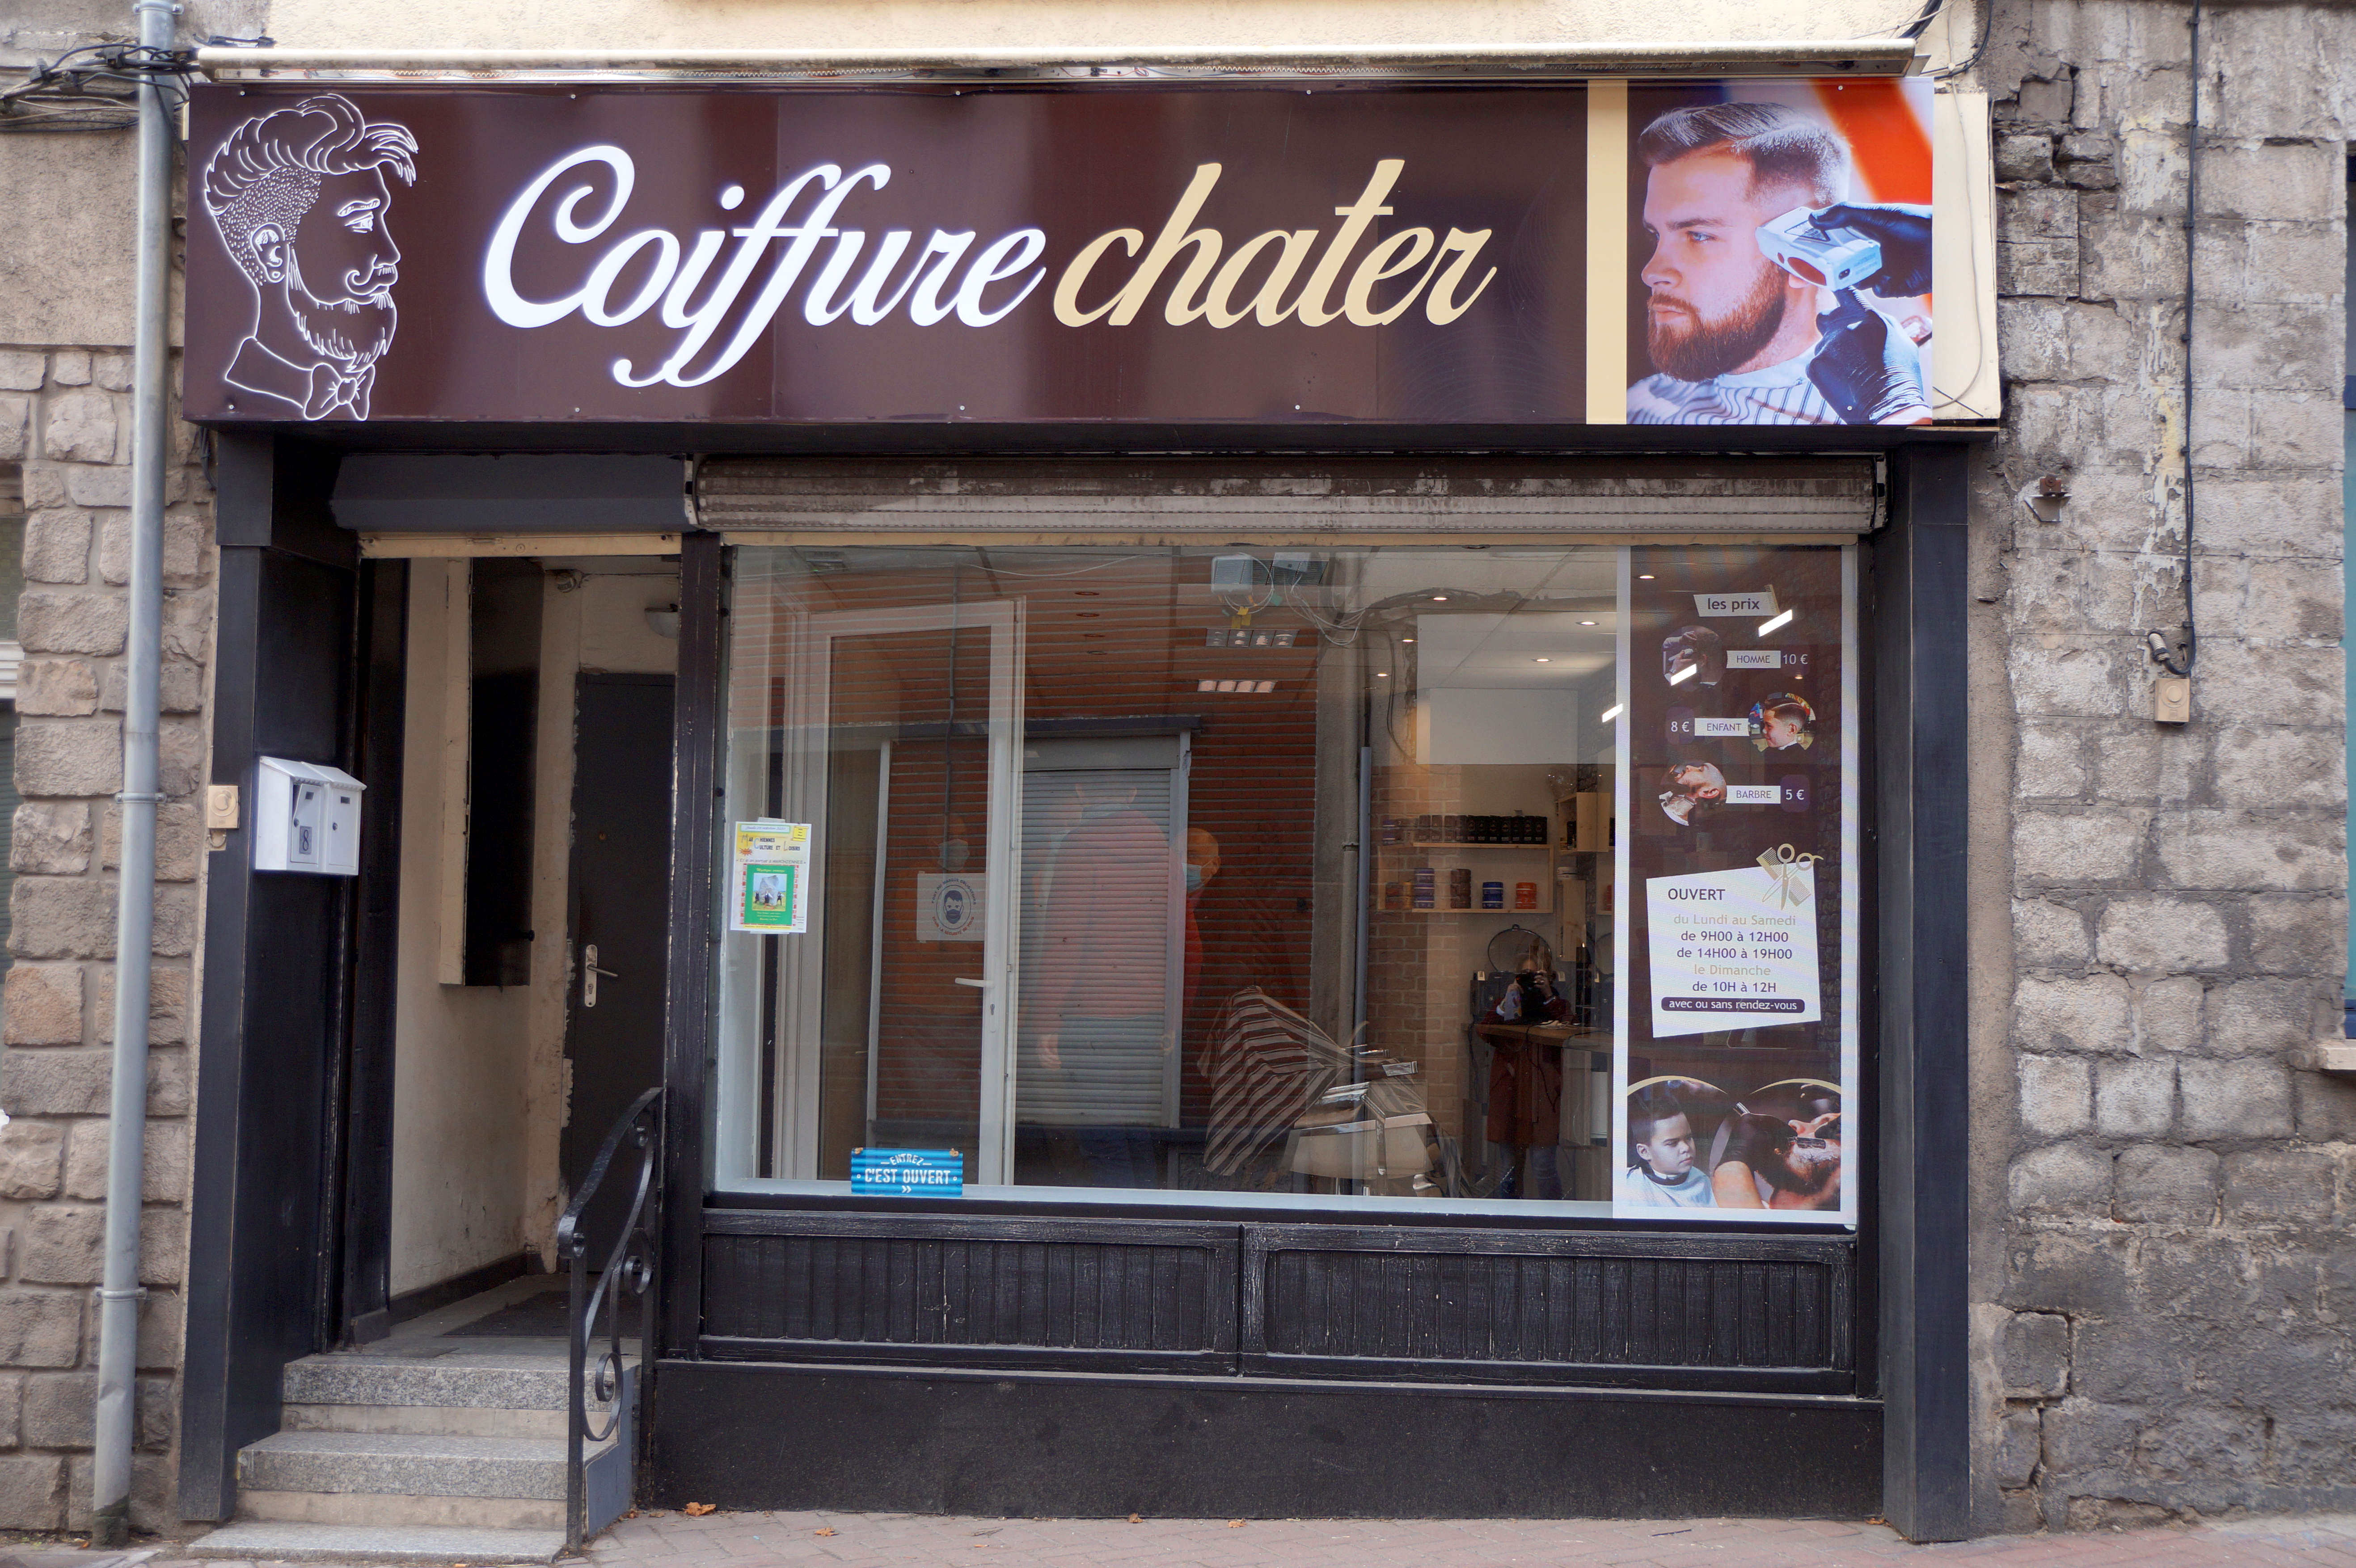 Coiffure Chater.JPG